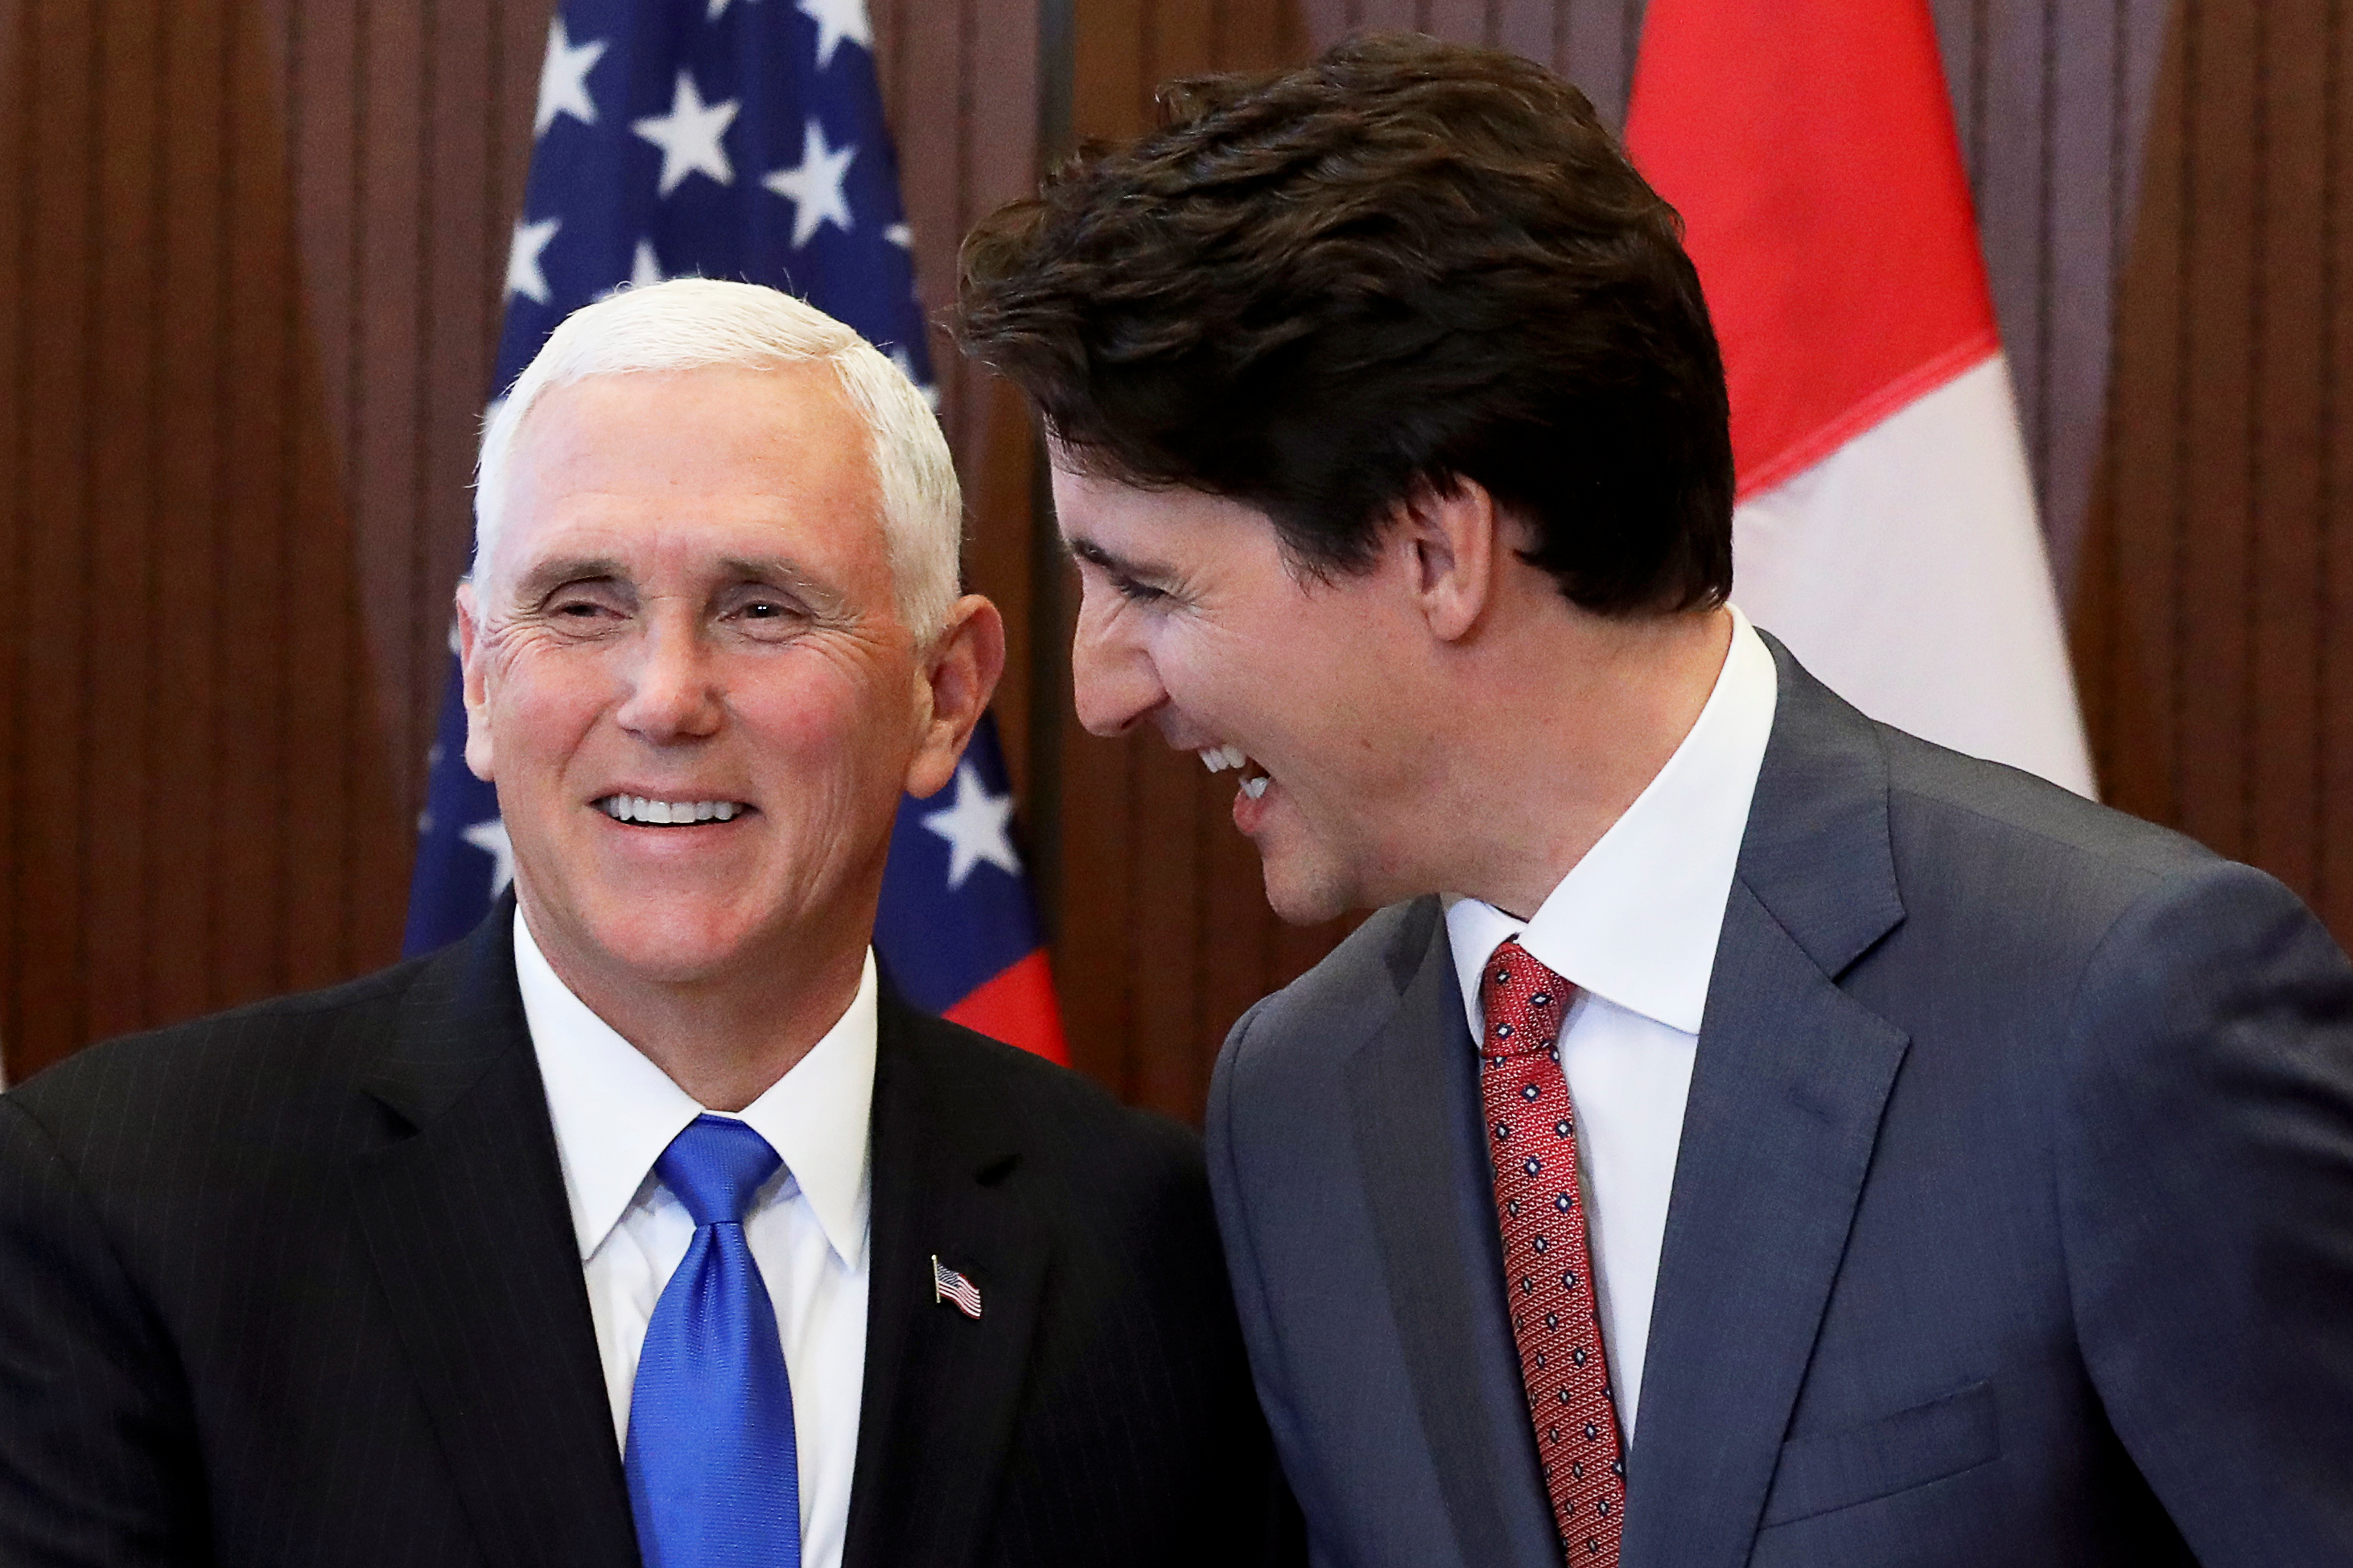 Canada's Prime Minister Justin Trudeau and U.S. Vice President Mike Pence shake hands during a welcoming ceremony on Parliament Hill in Ottawa, Ontario, Canada, May 30, 2019. REUTERS/Chris Wattie 